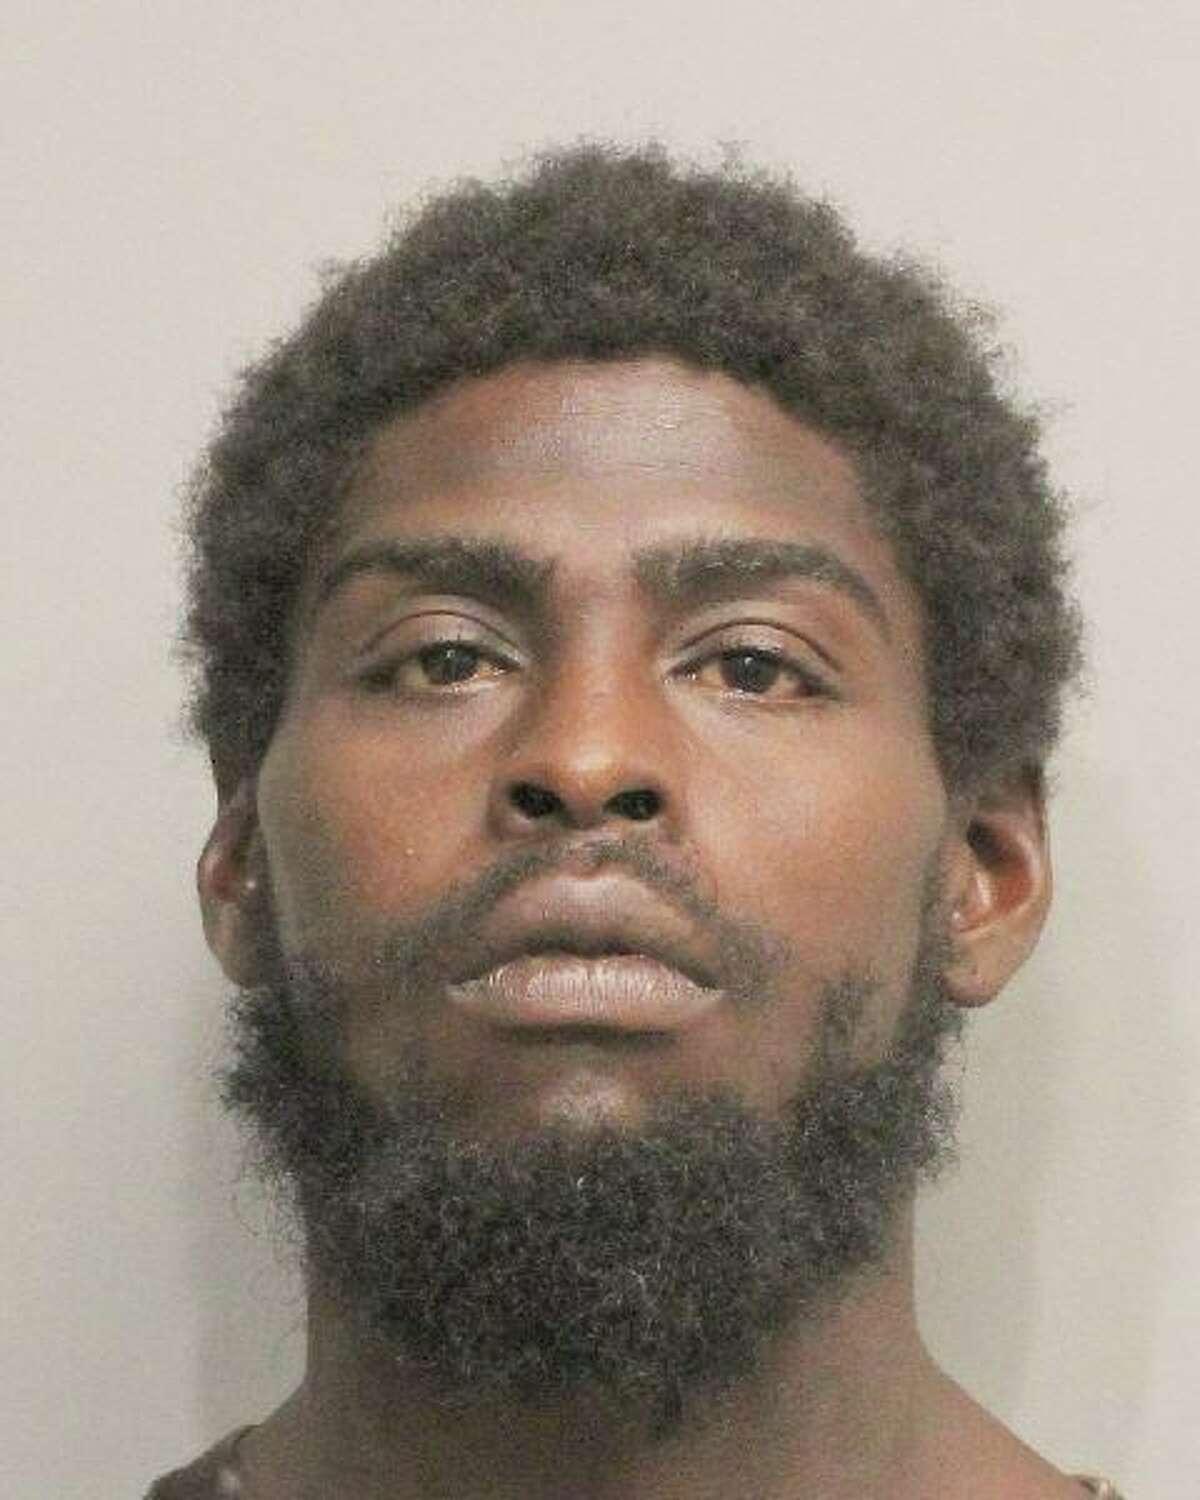 "Our deputies, through their diligent investigation, were able to determine that this man was the same one wanted by our partners at HPD for this felony crime," Harris County constable Ted Heap said in a post on the organization's Facebook page. "This is another great example of law enforcement combining efforts to apprehend a wanted felon."